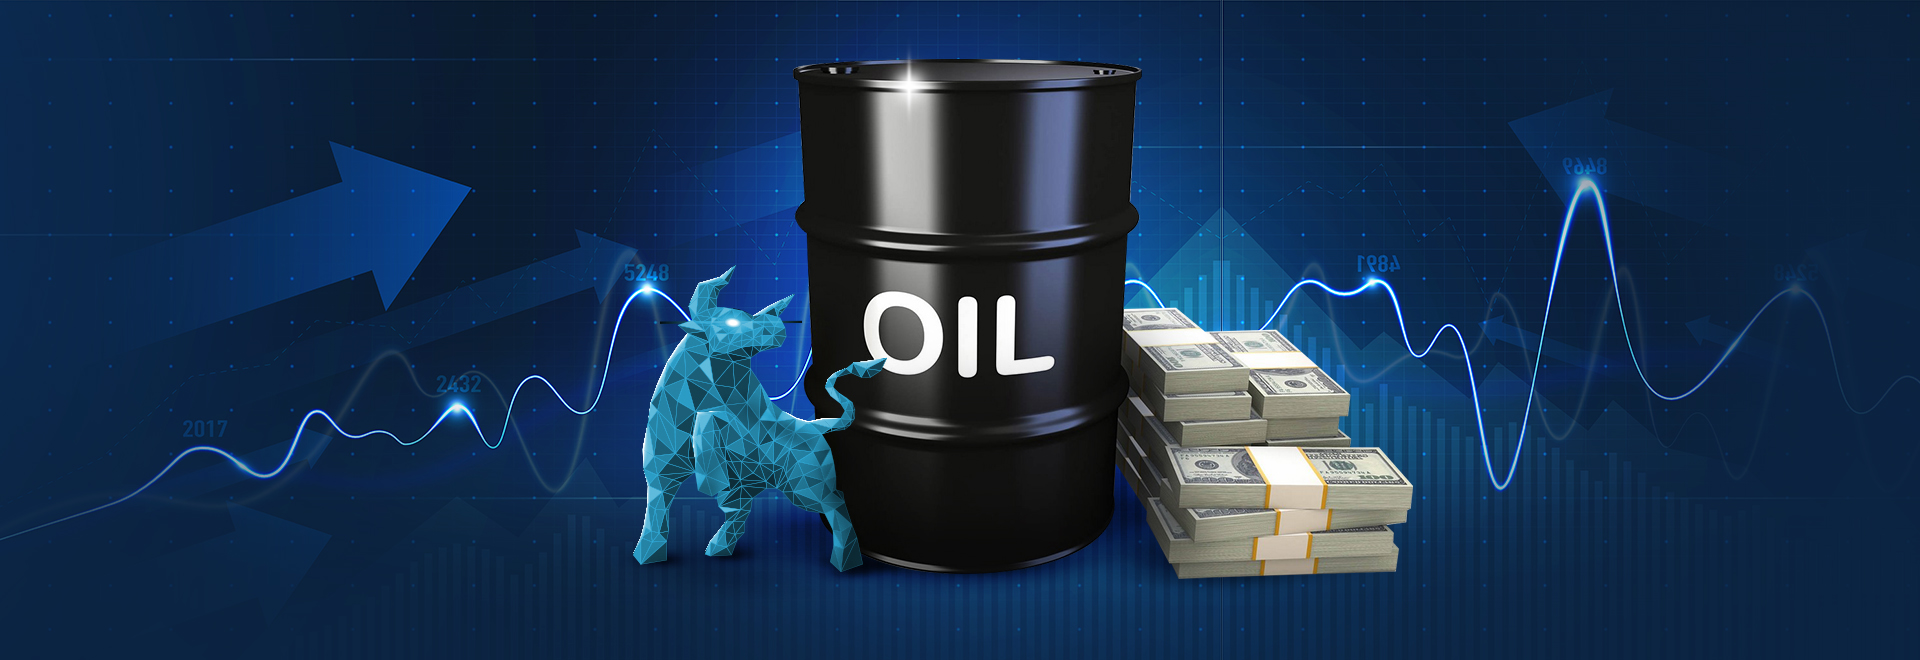 Oil Potential Opportunities For Strategic Trading